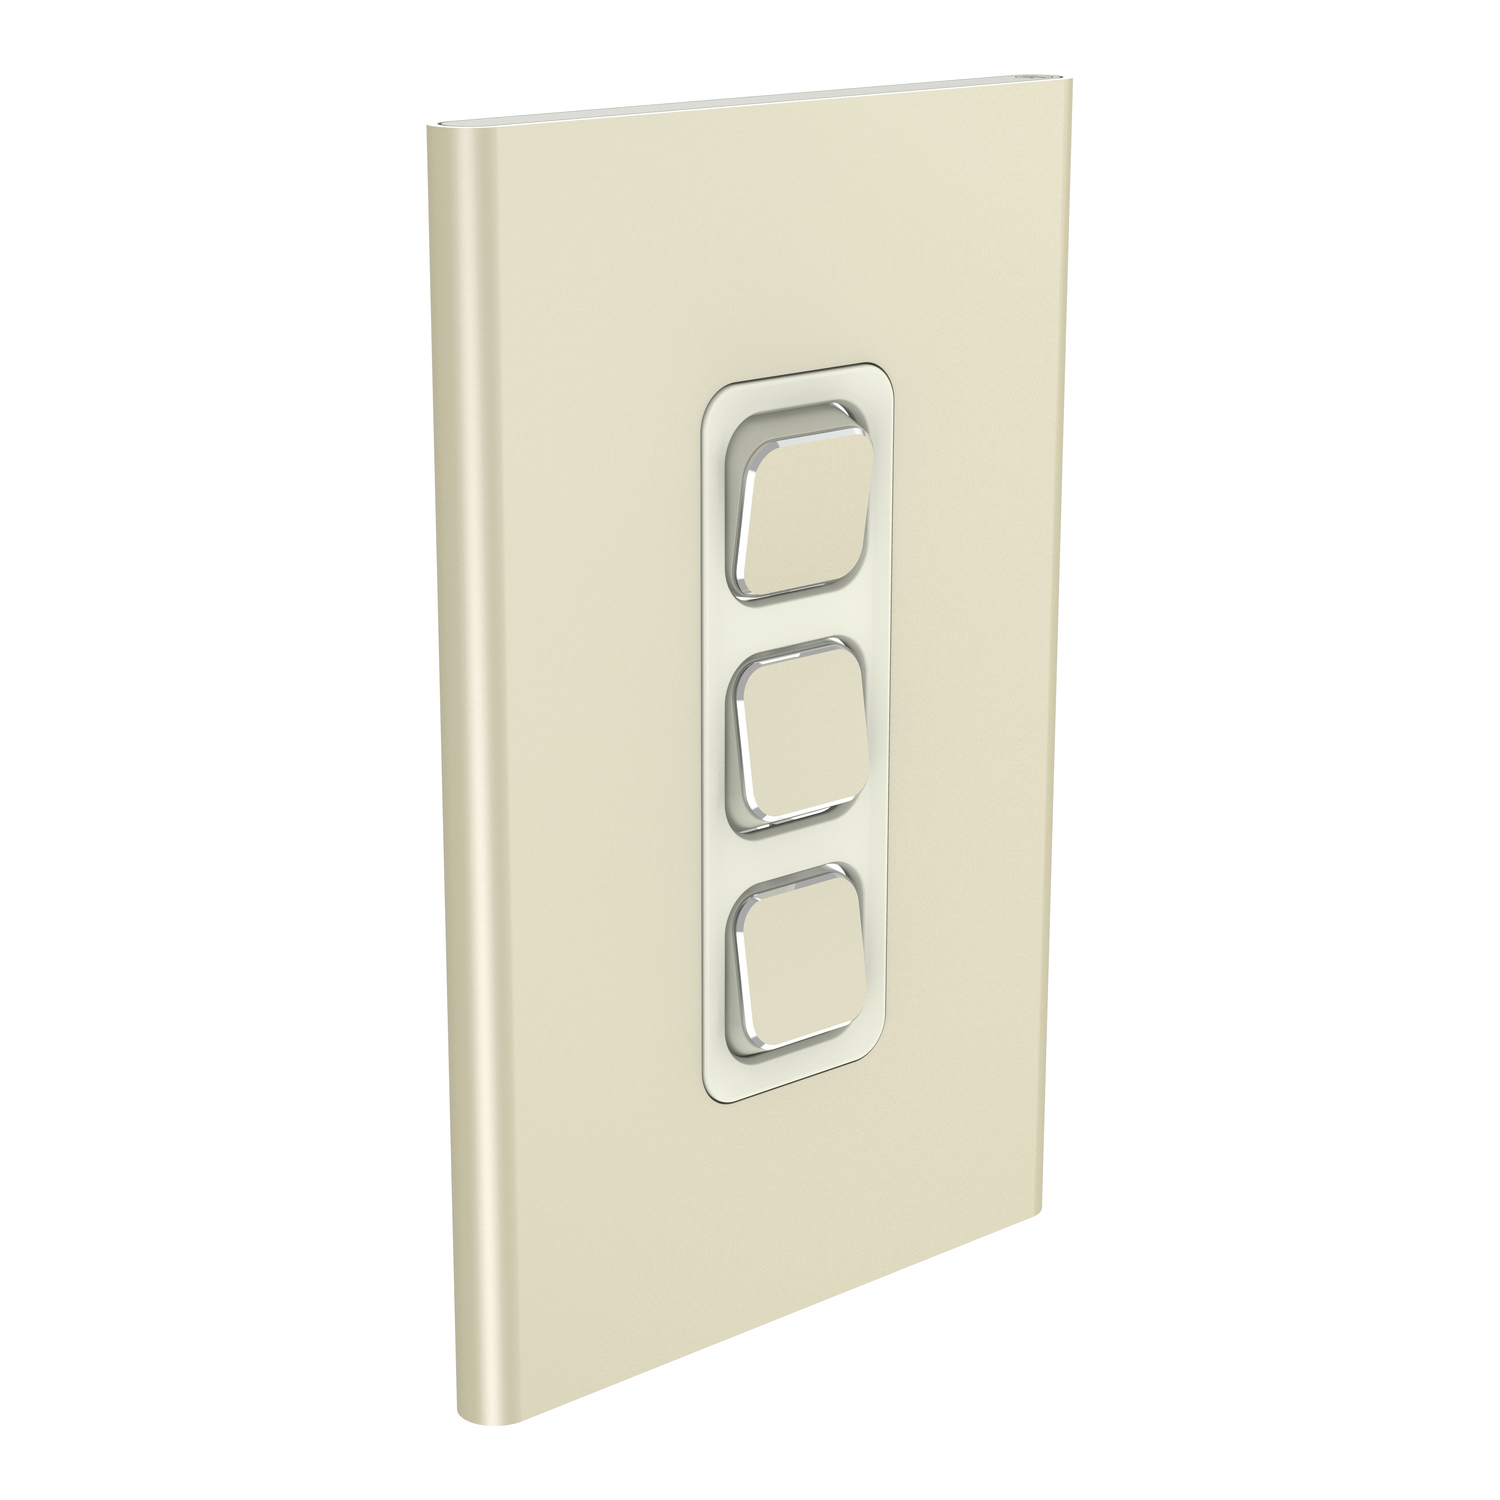 PDL Iconic Styl - Cover Plate Switch 3-Gang - Crowne